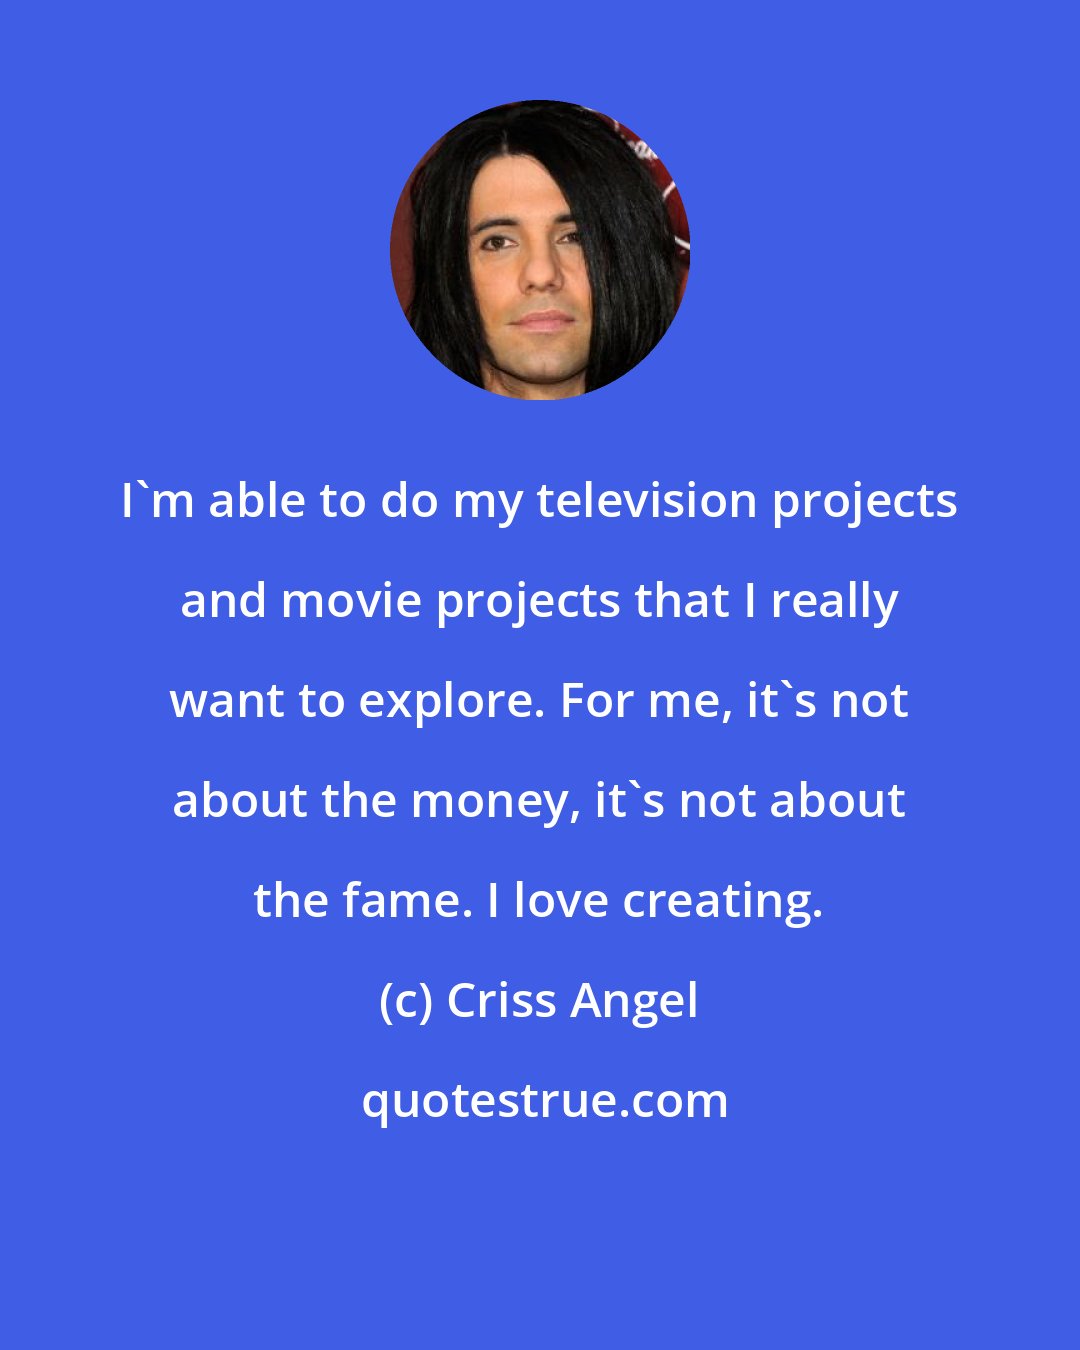 Criss Angel: I'm able to do my television projects and movie projects that I really want to explore. For me, it's not about the money, it's not about the fame. I love creating.